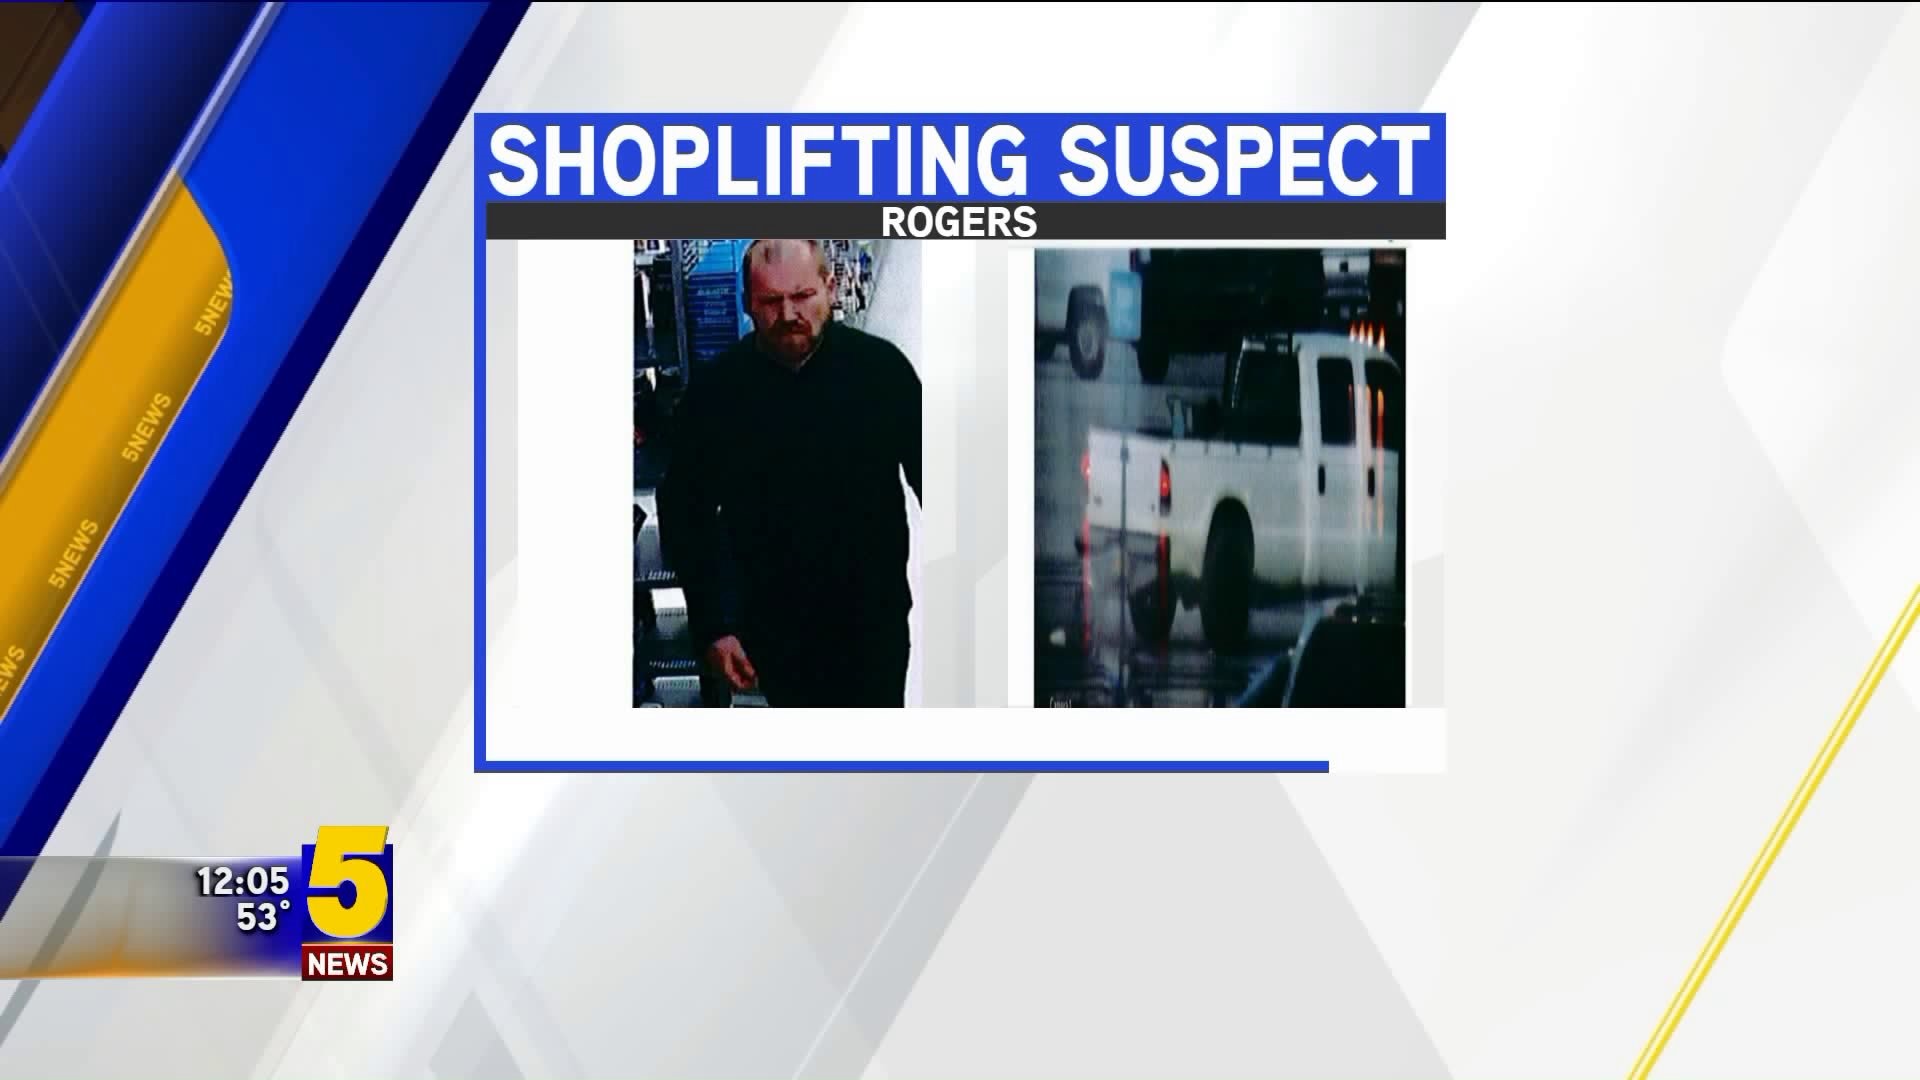 Rogers Shoplifting Suspect